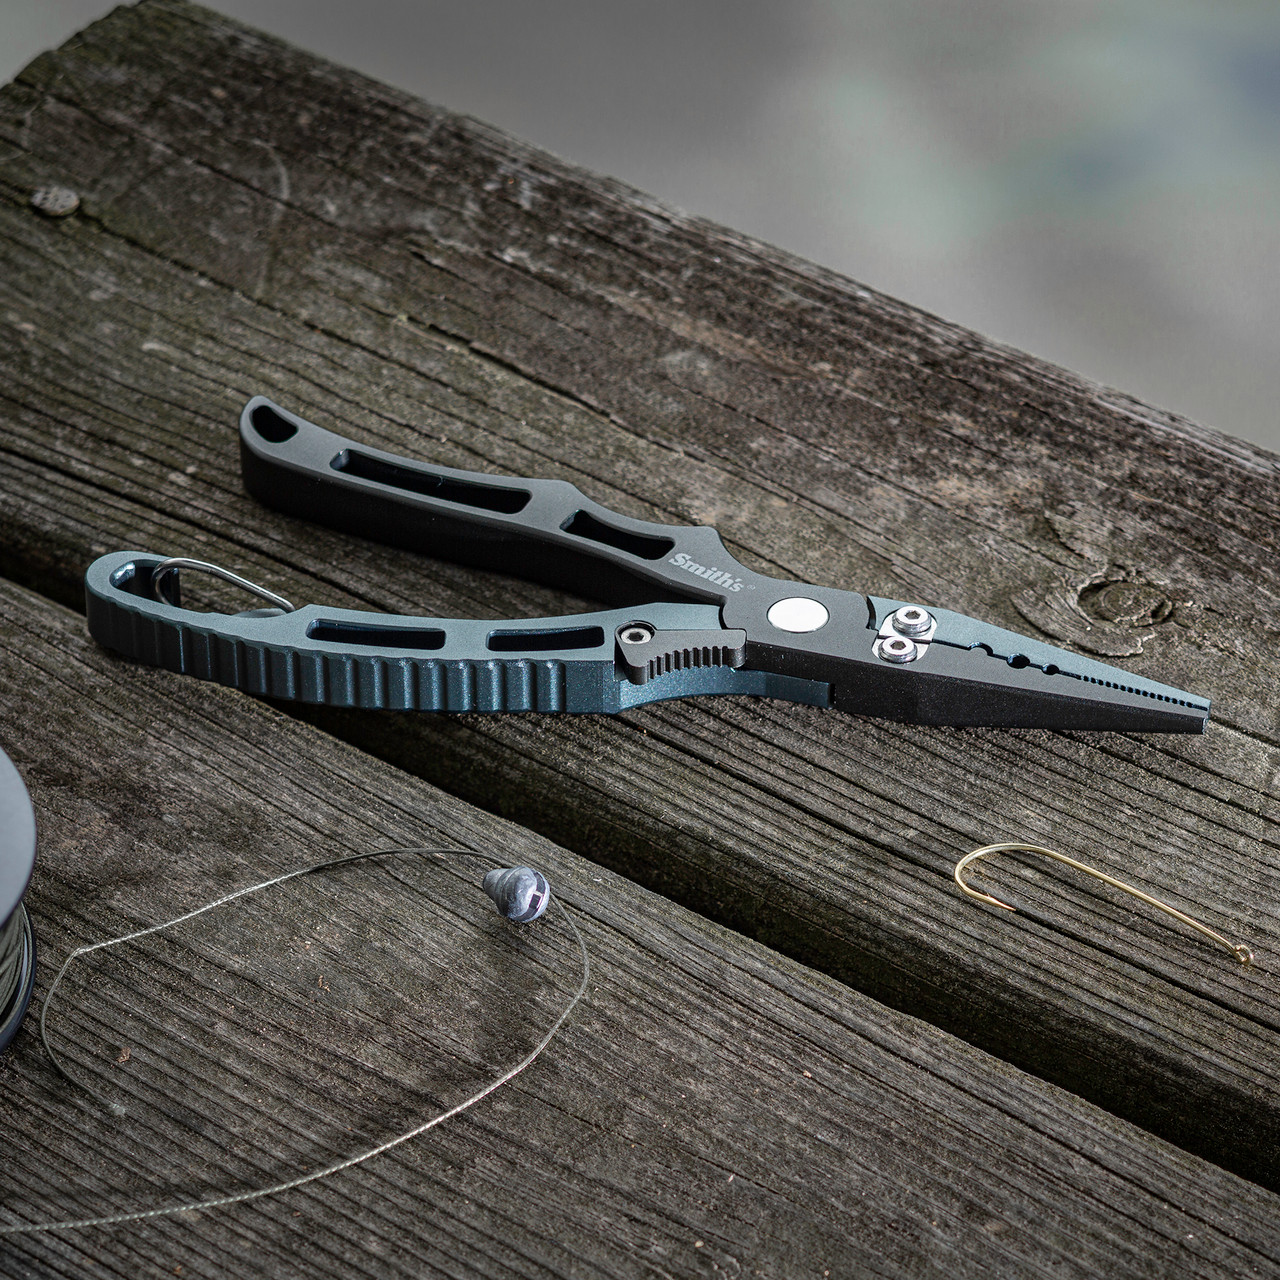 Locking Aluminum Fishing Pliers - Smith's Consumer Products